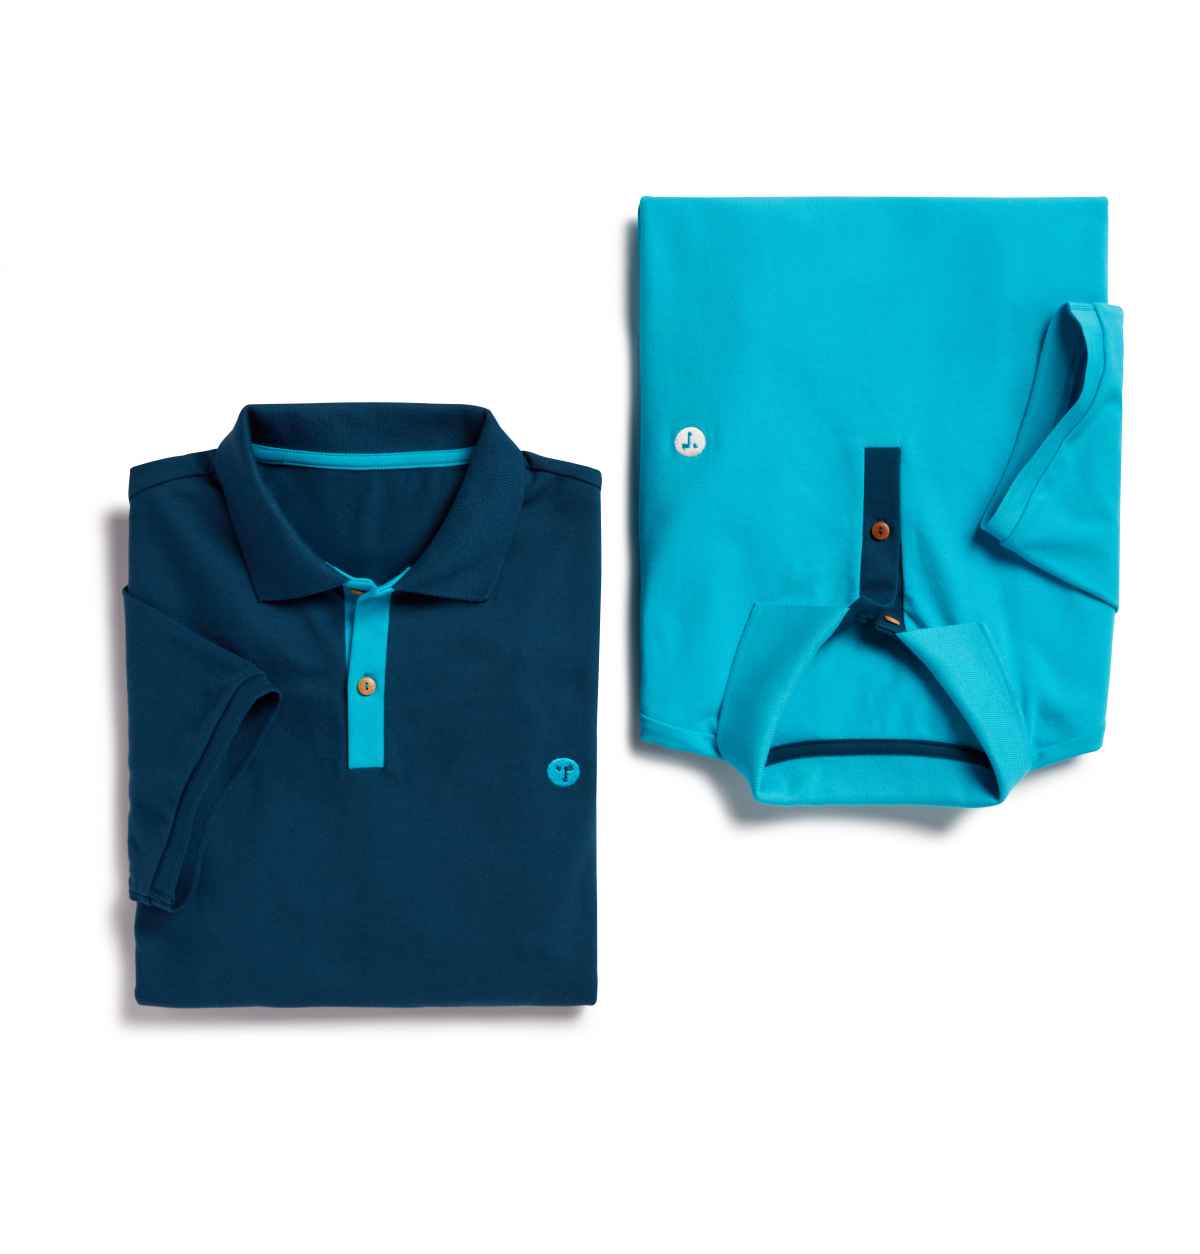 EXCLUSIVE: OCEAN TEE founder talks Mako polo shirt and 